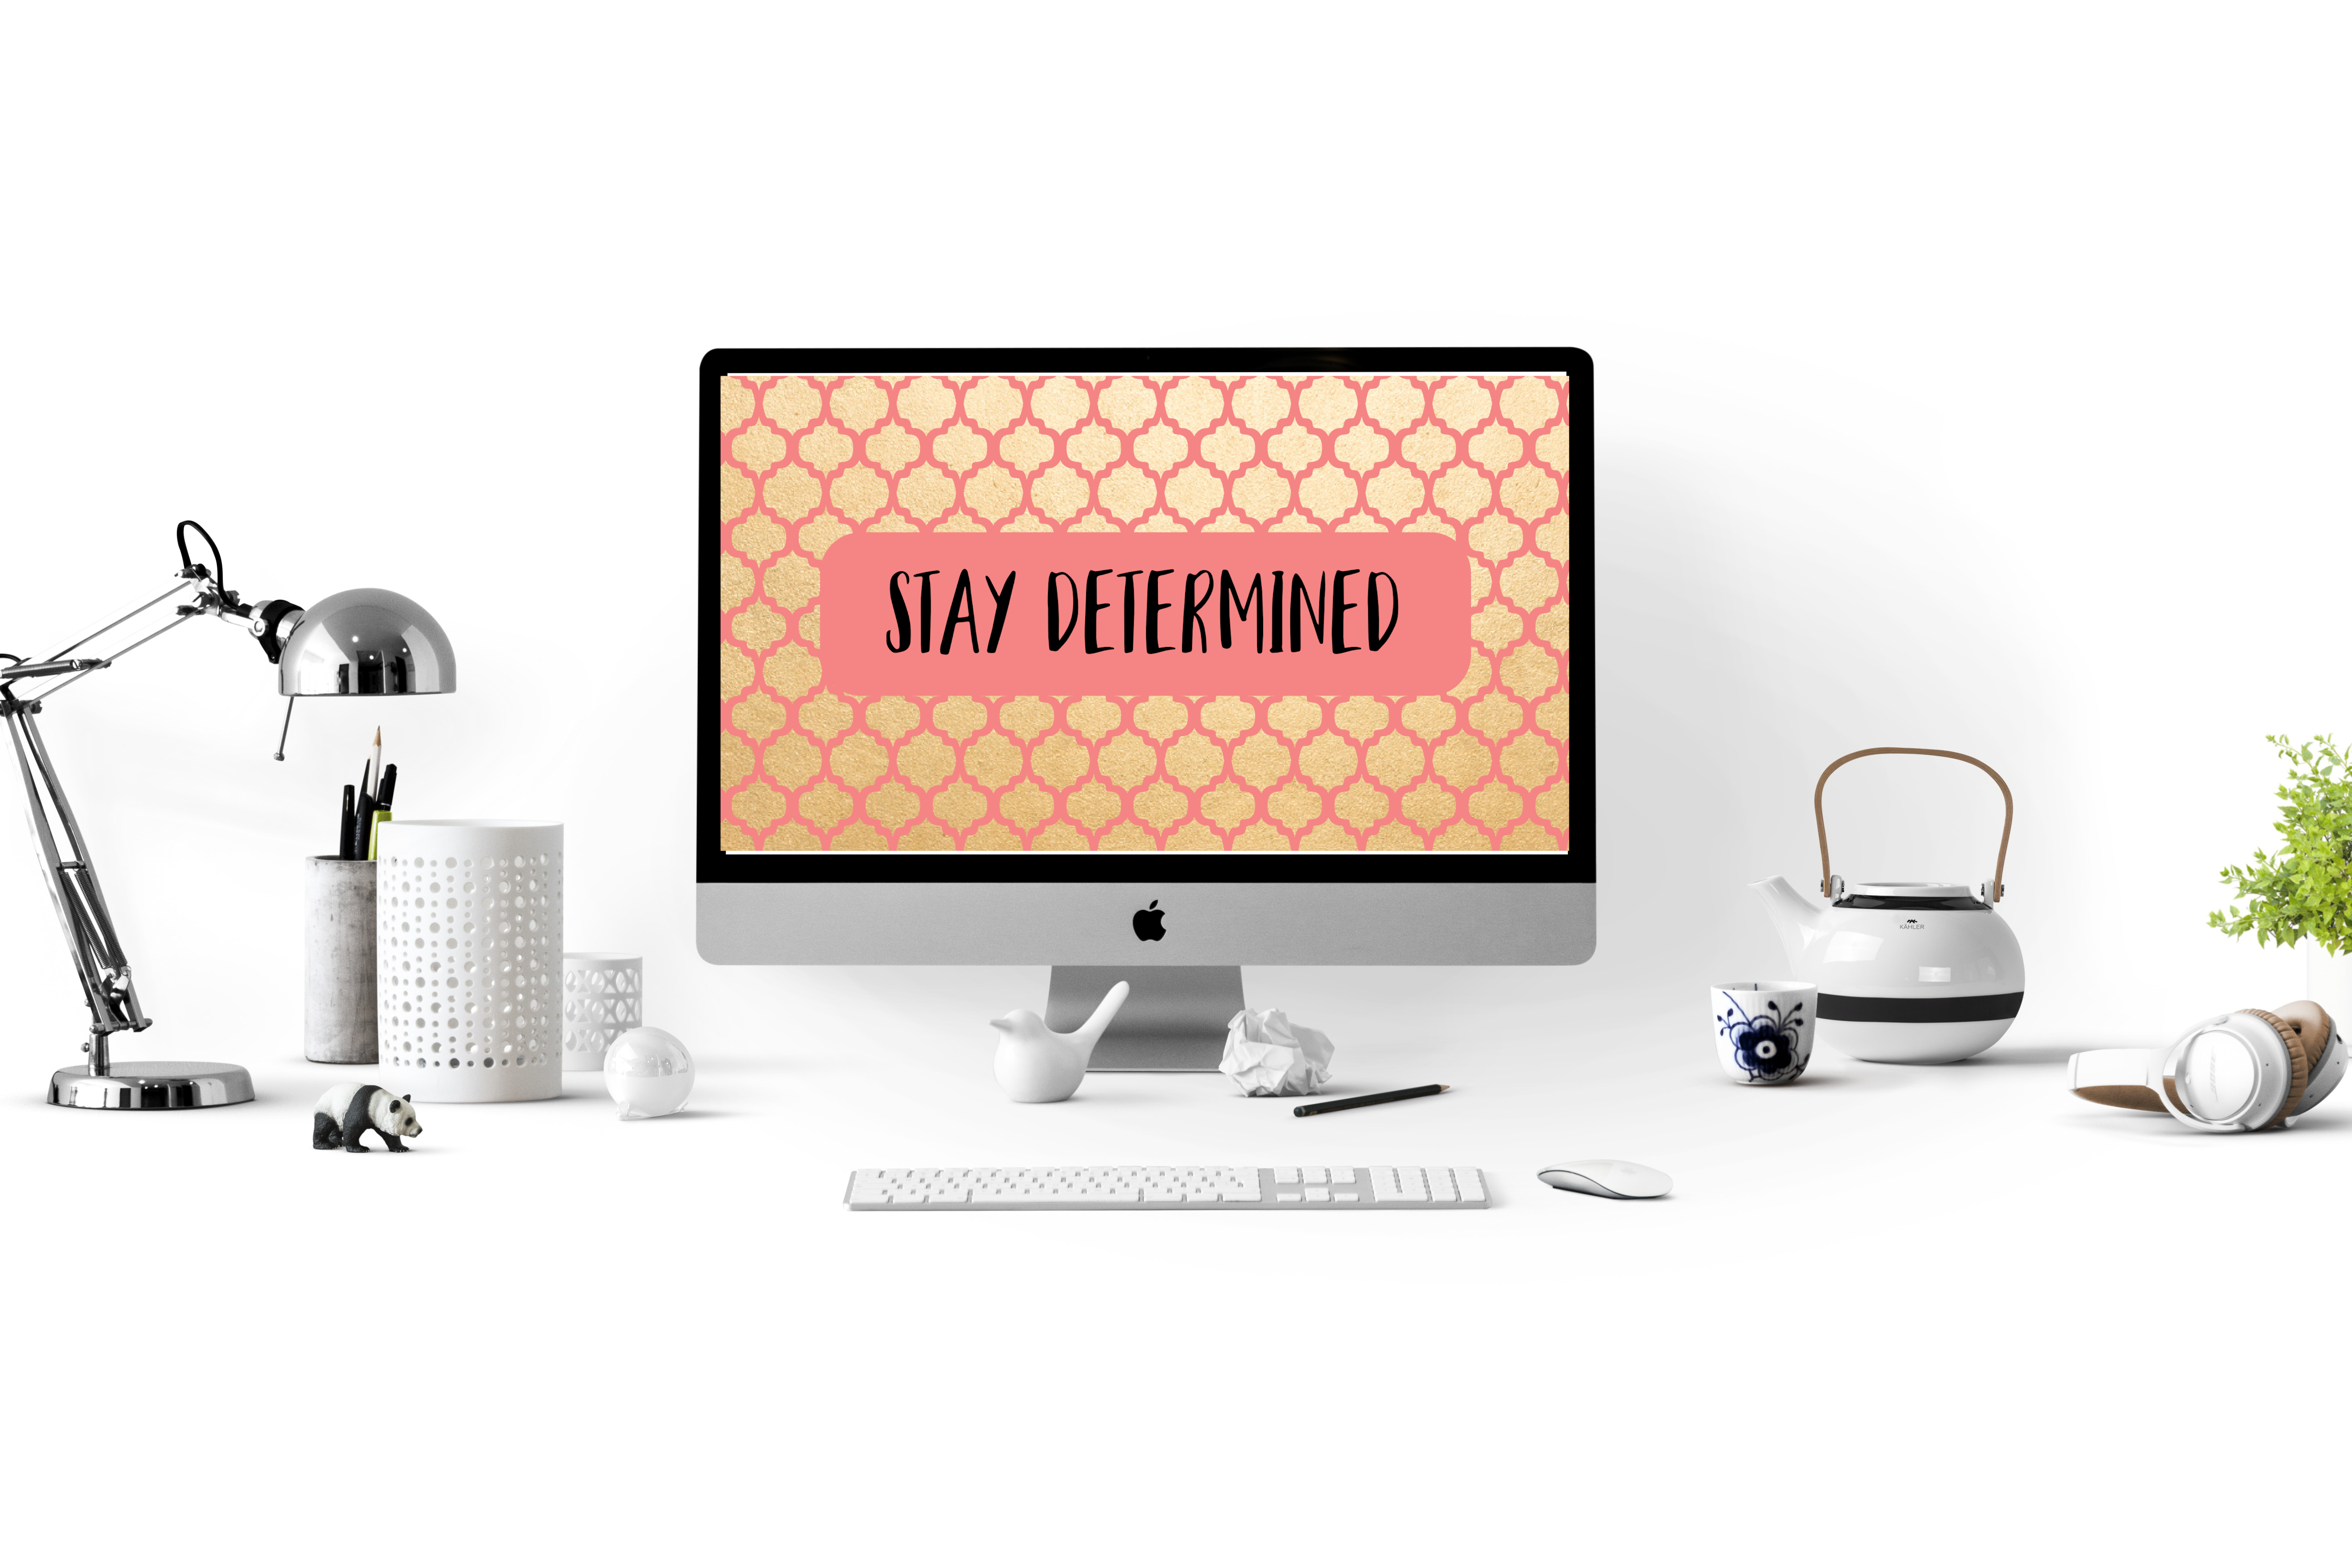 Free March 2019 Computer Wallpaper - March 2019 Background Macbook - HD Wallpaper 